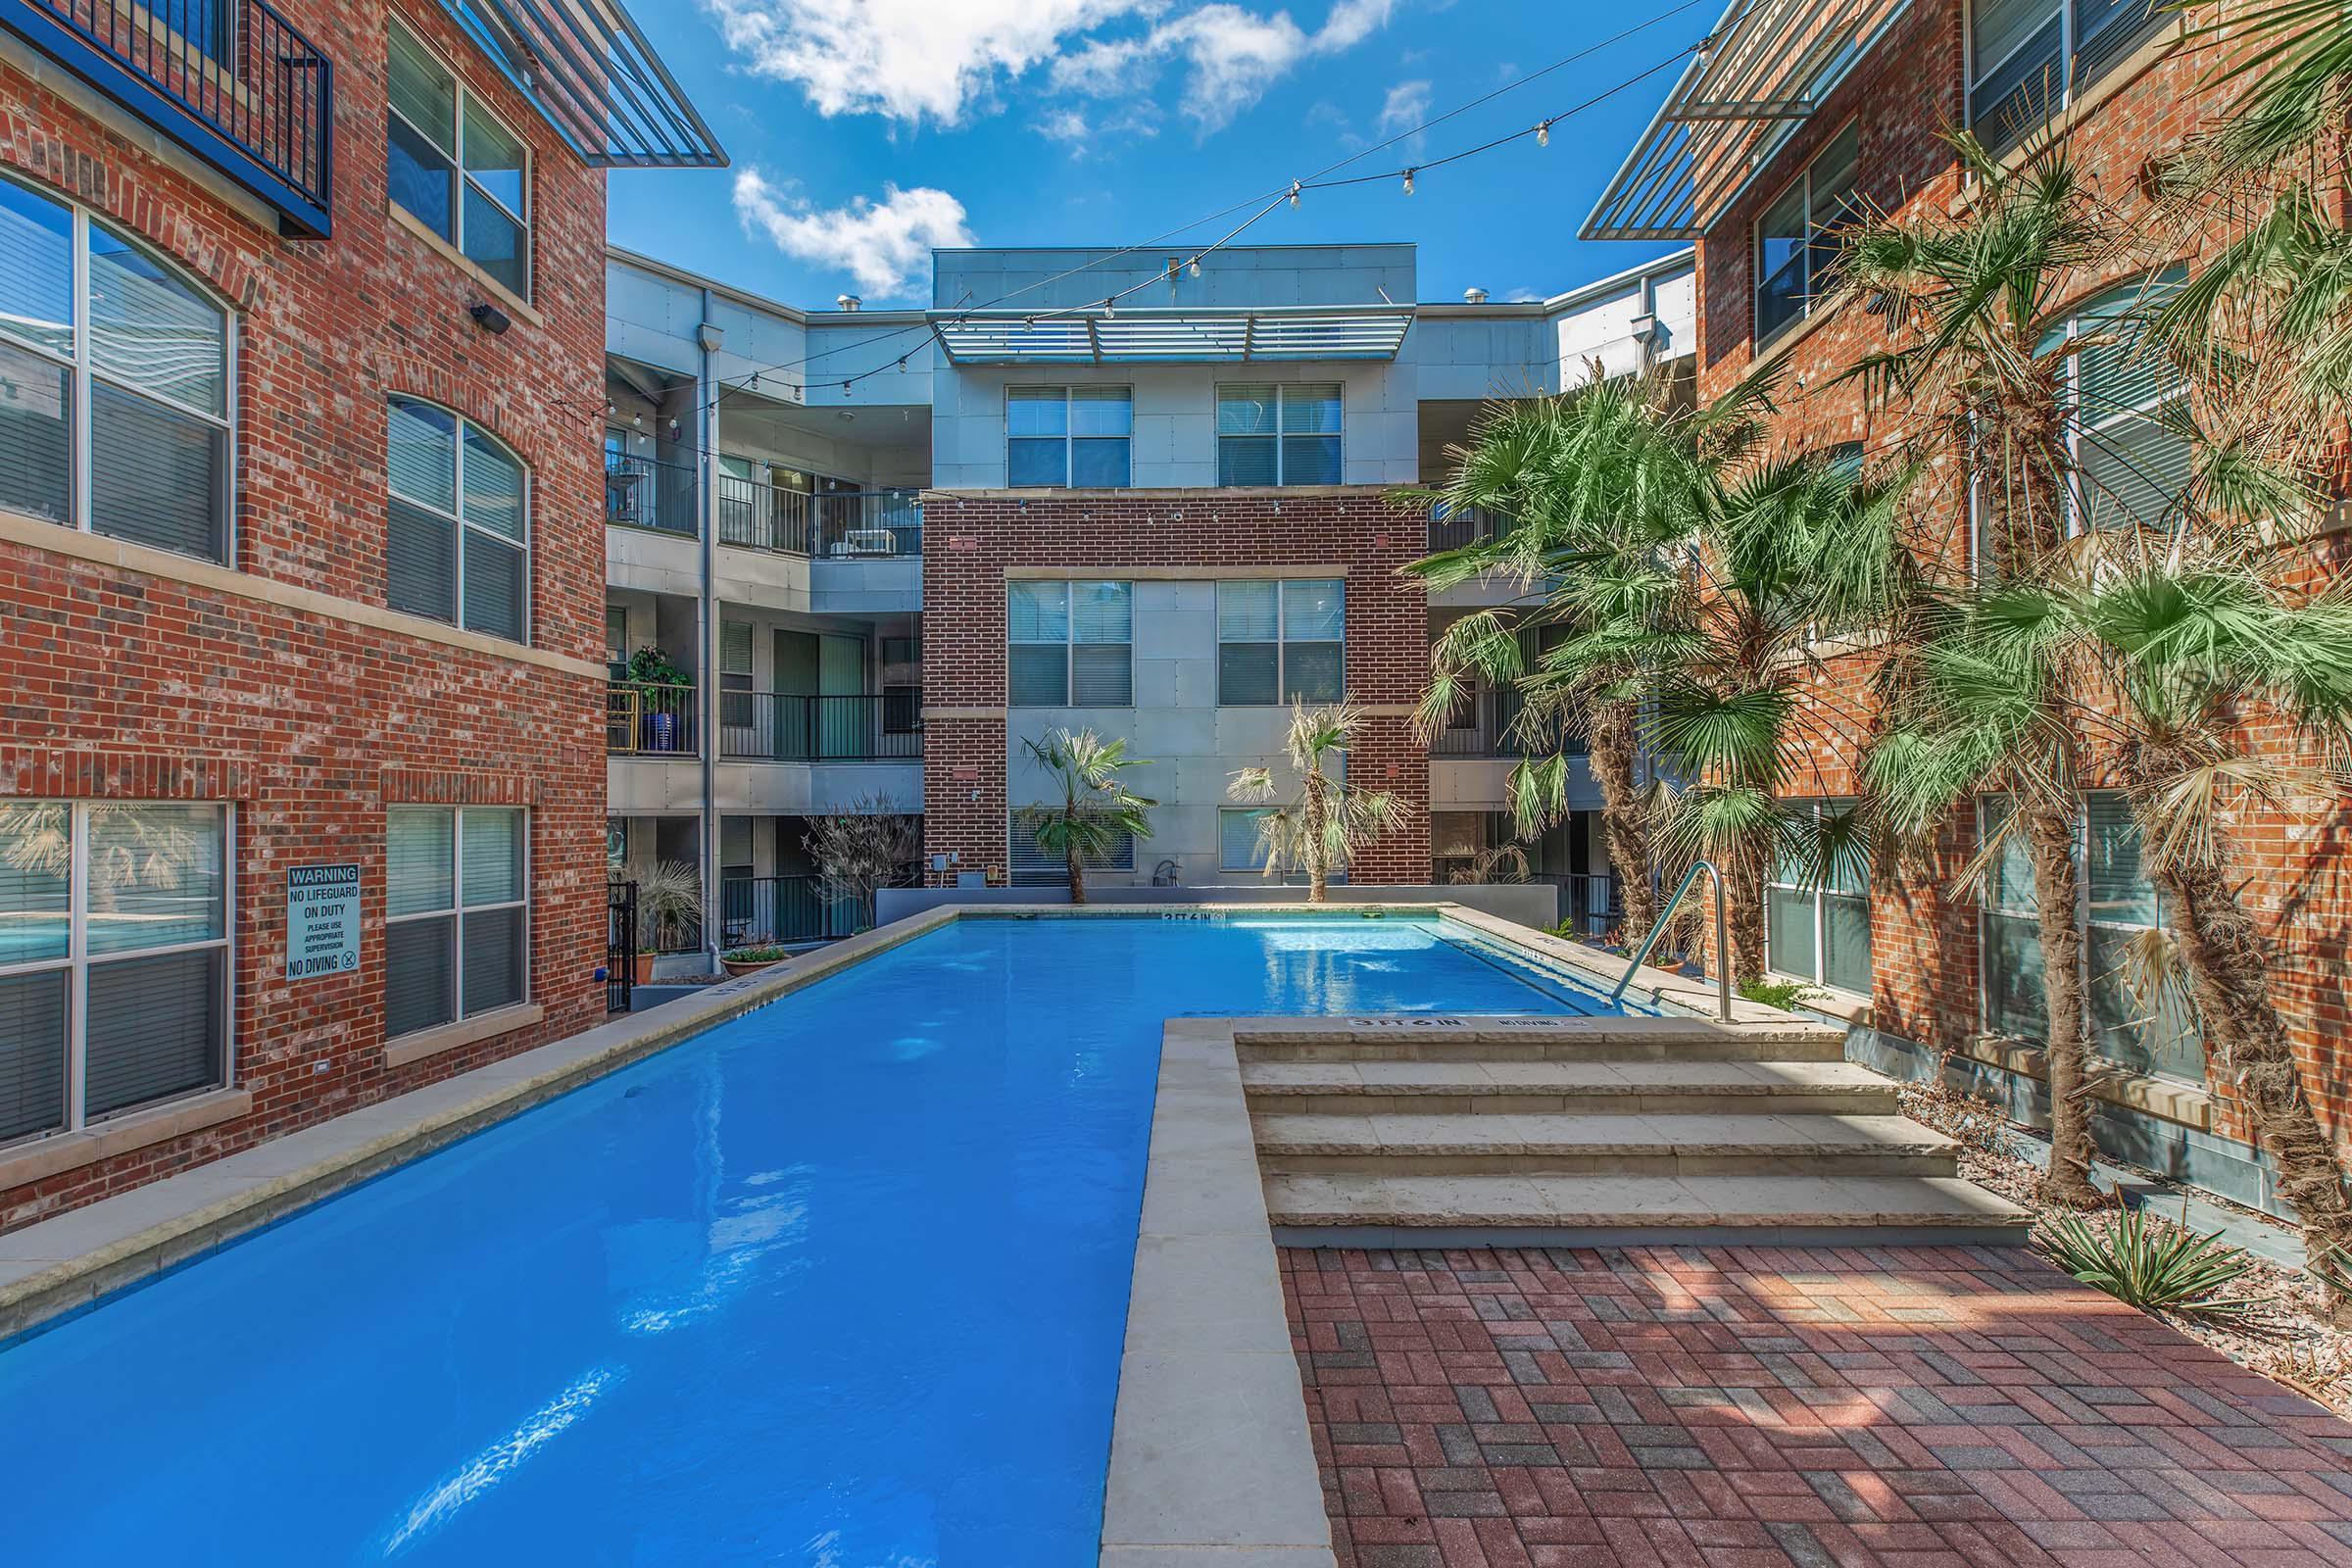 a large brick building with a pool